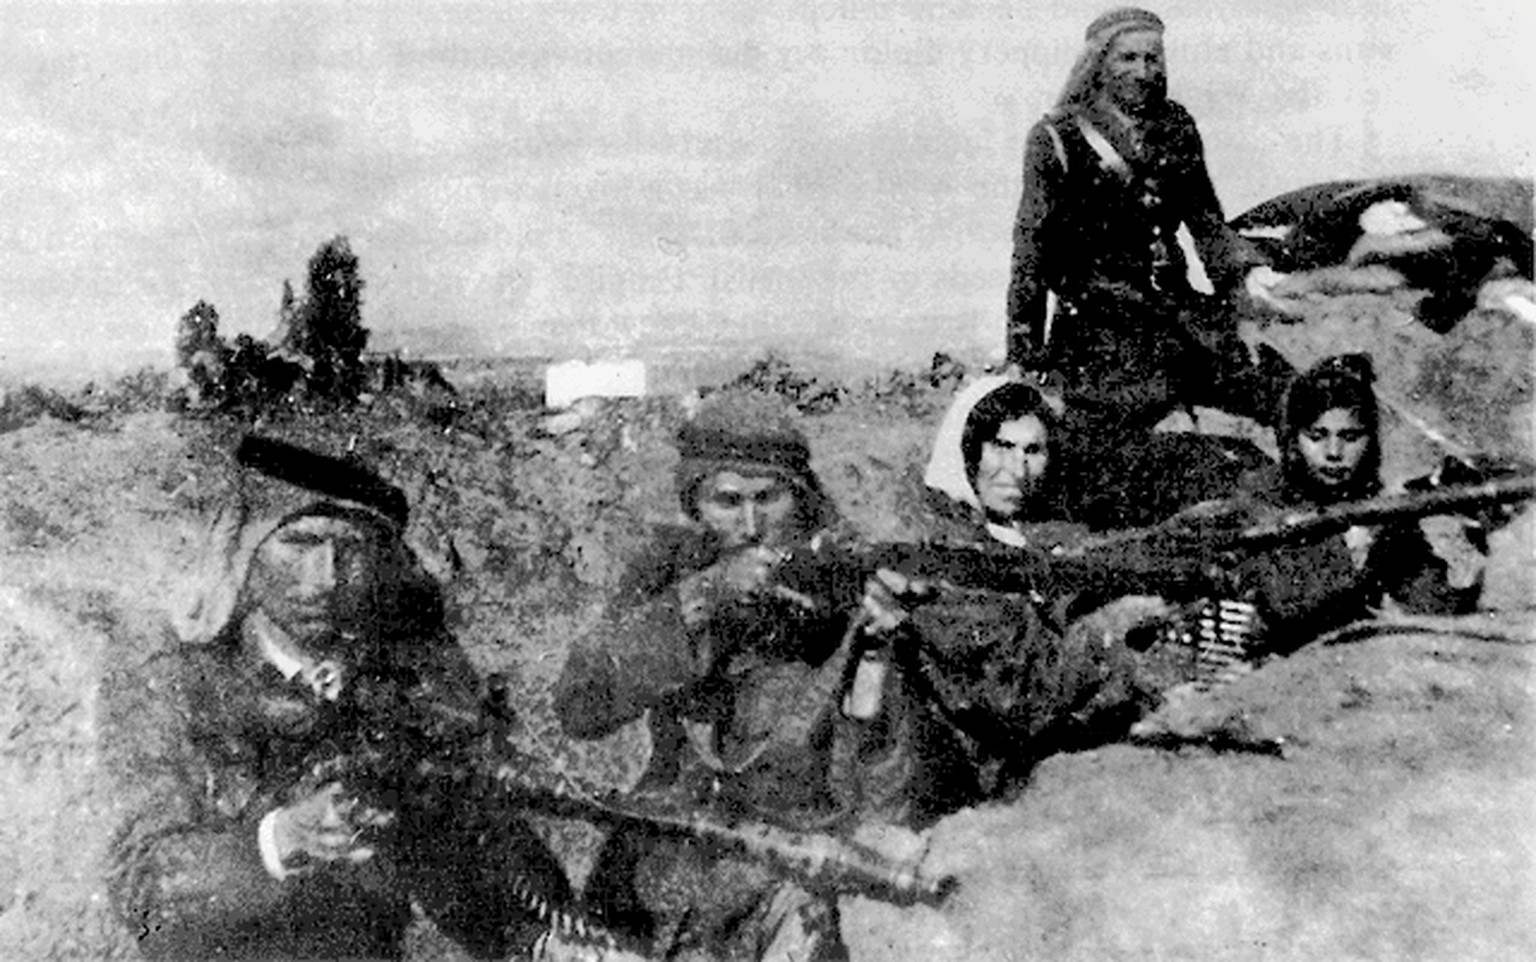 The Arab revolt of 1936–39 in Palestine
https://commons.wikimedia.org/w/index.php?curid=3632094